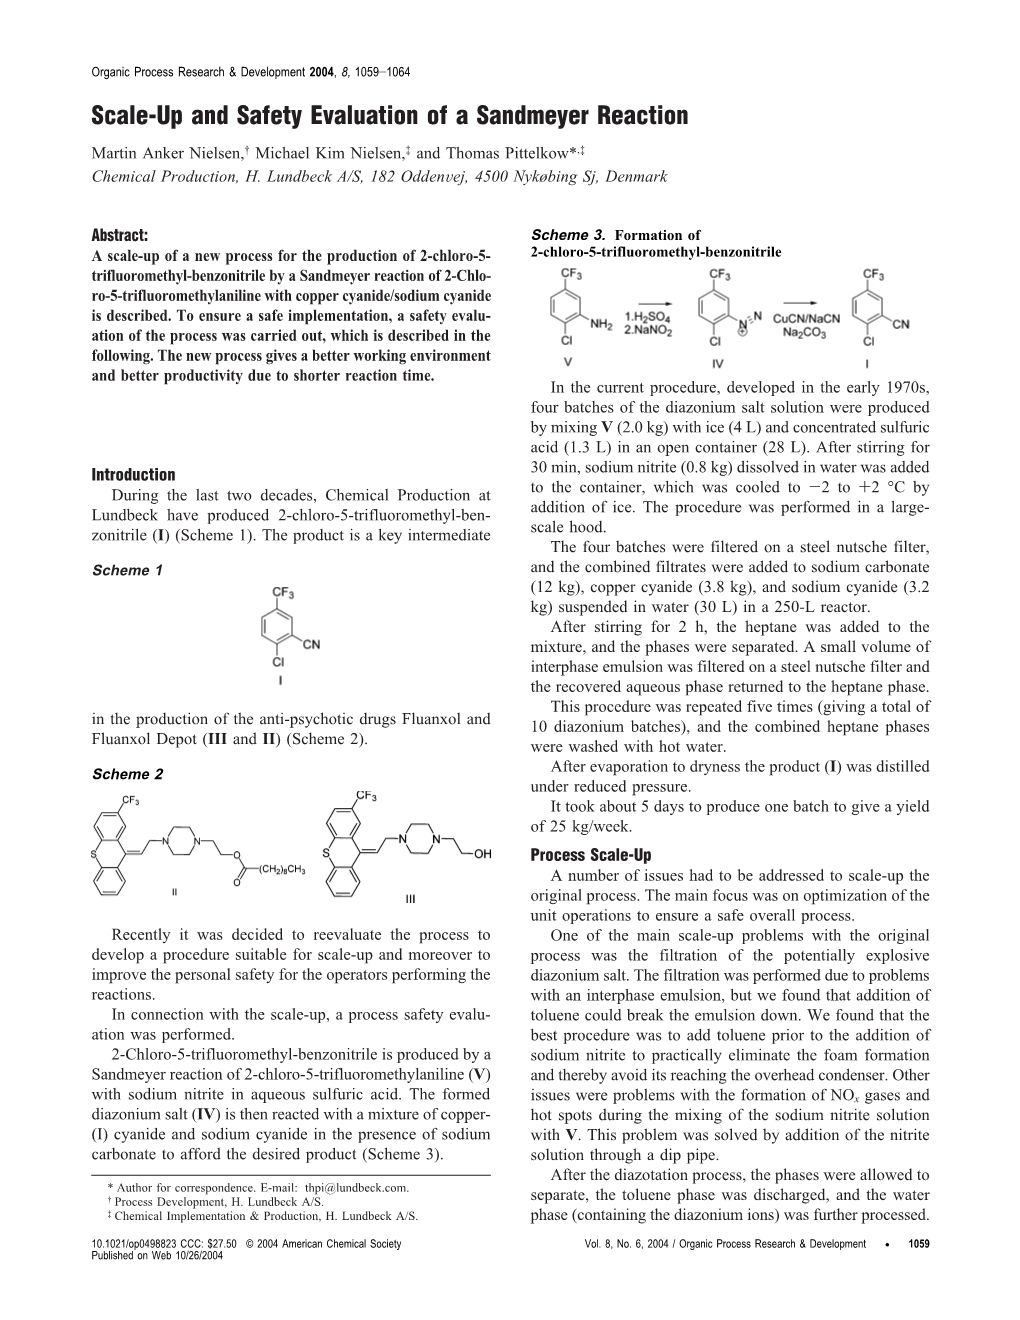 Scale-Up and Safety Evaluation of a Sandmeyer Reaction Martin Anker Nielsen,† Michael Kim Nielsen,‡ and Thomas Pittelkow*,‡ Chemical Production, H